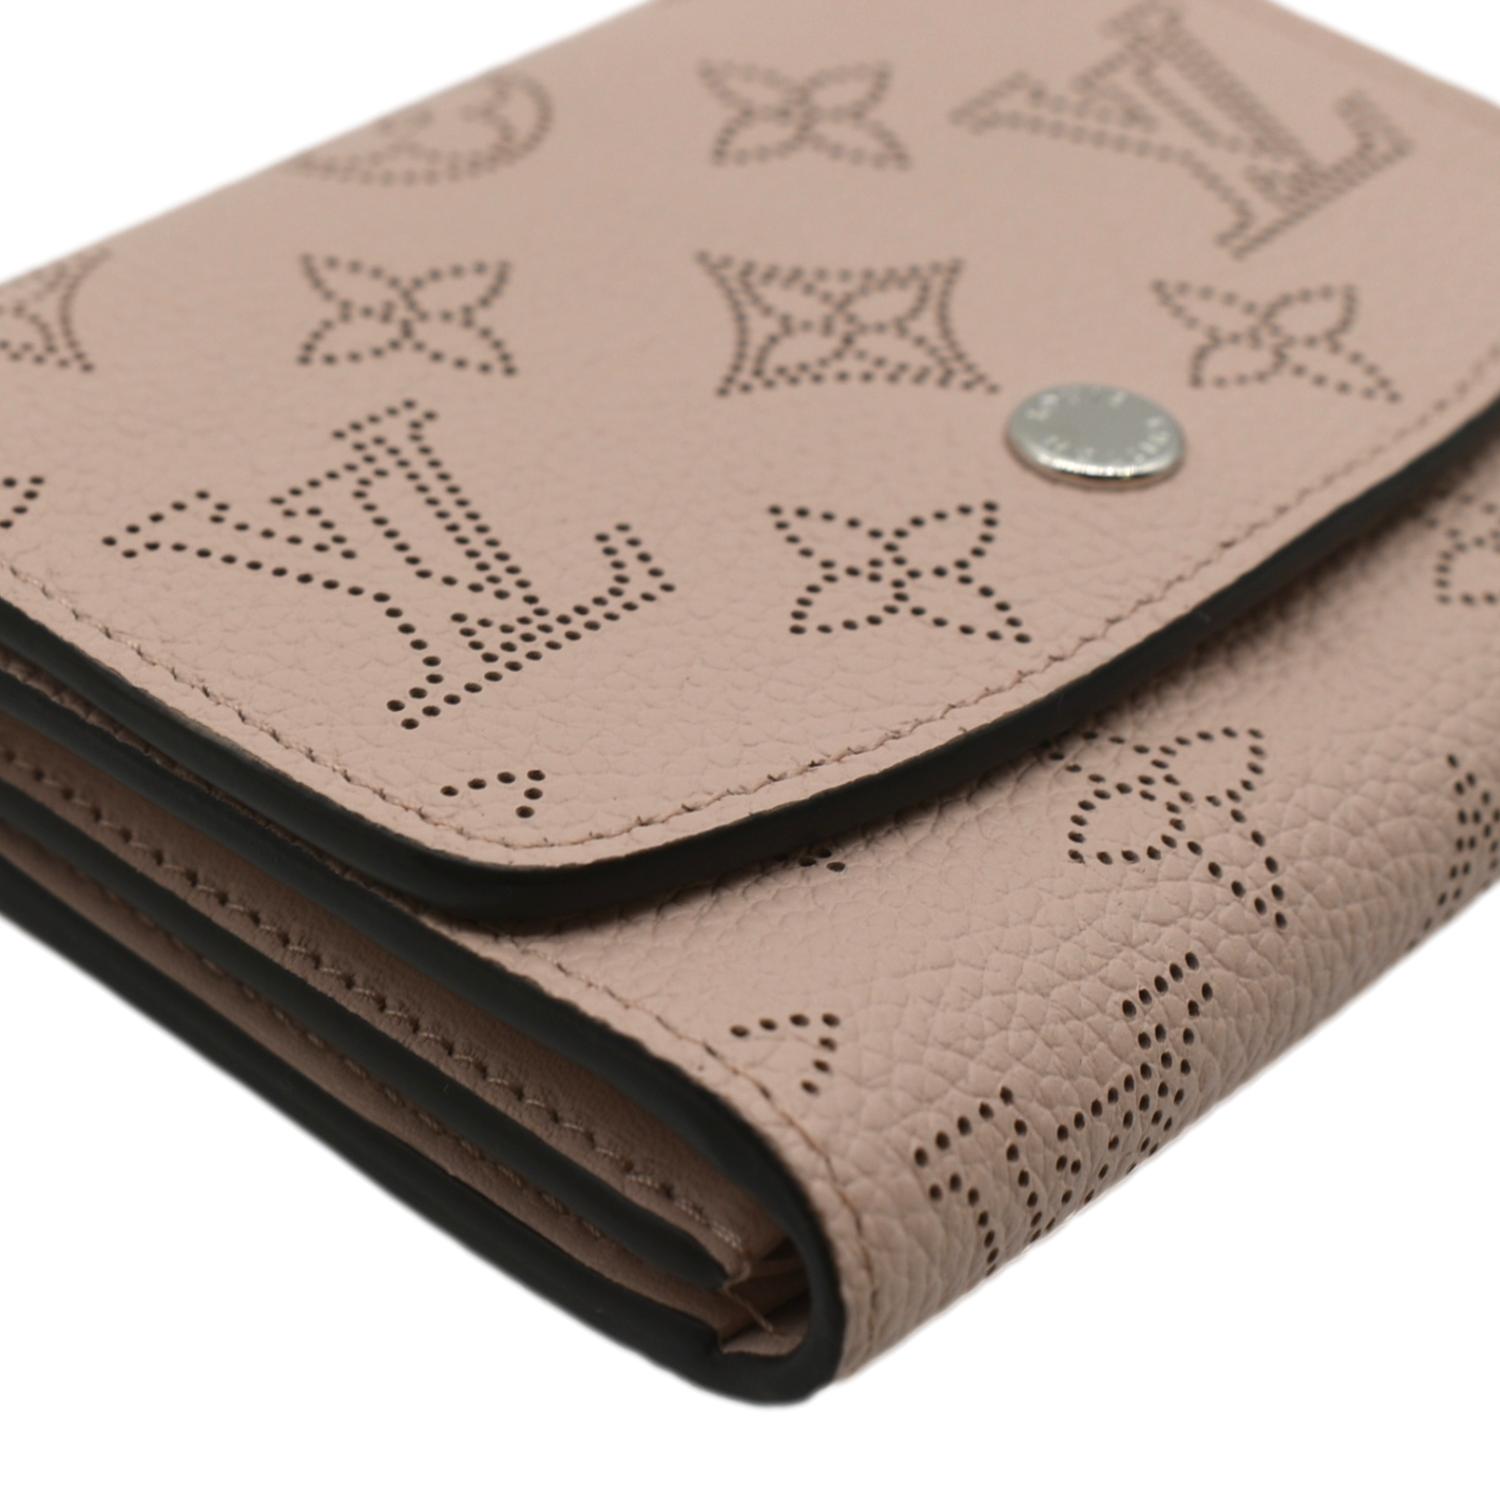 Zippy Compact Wallet Mahina Leather - Wallets and Small Leather Goods